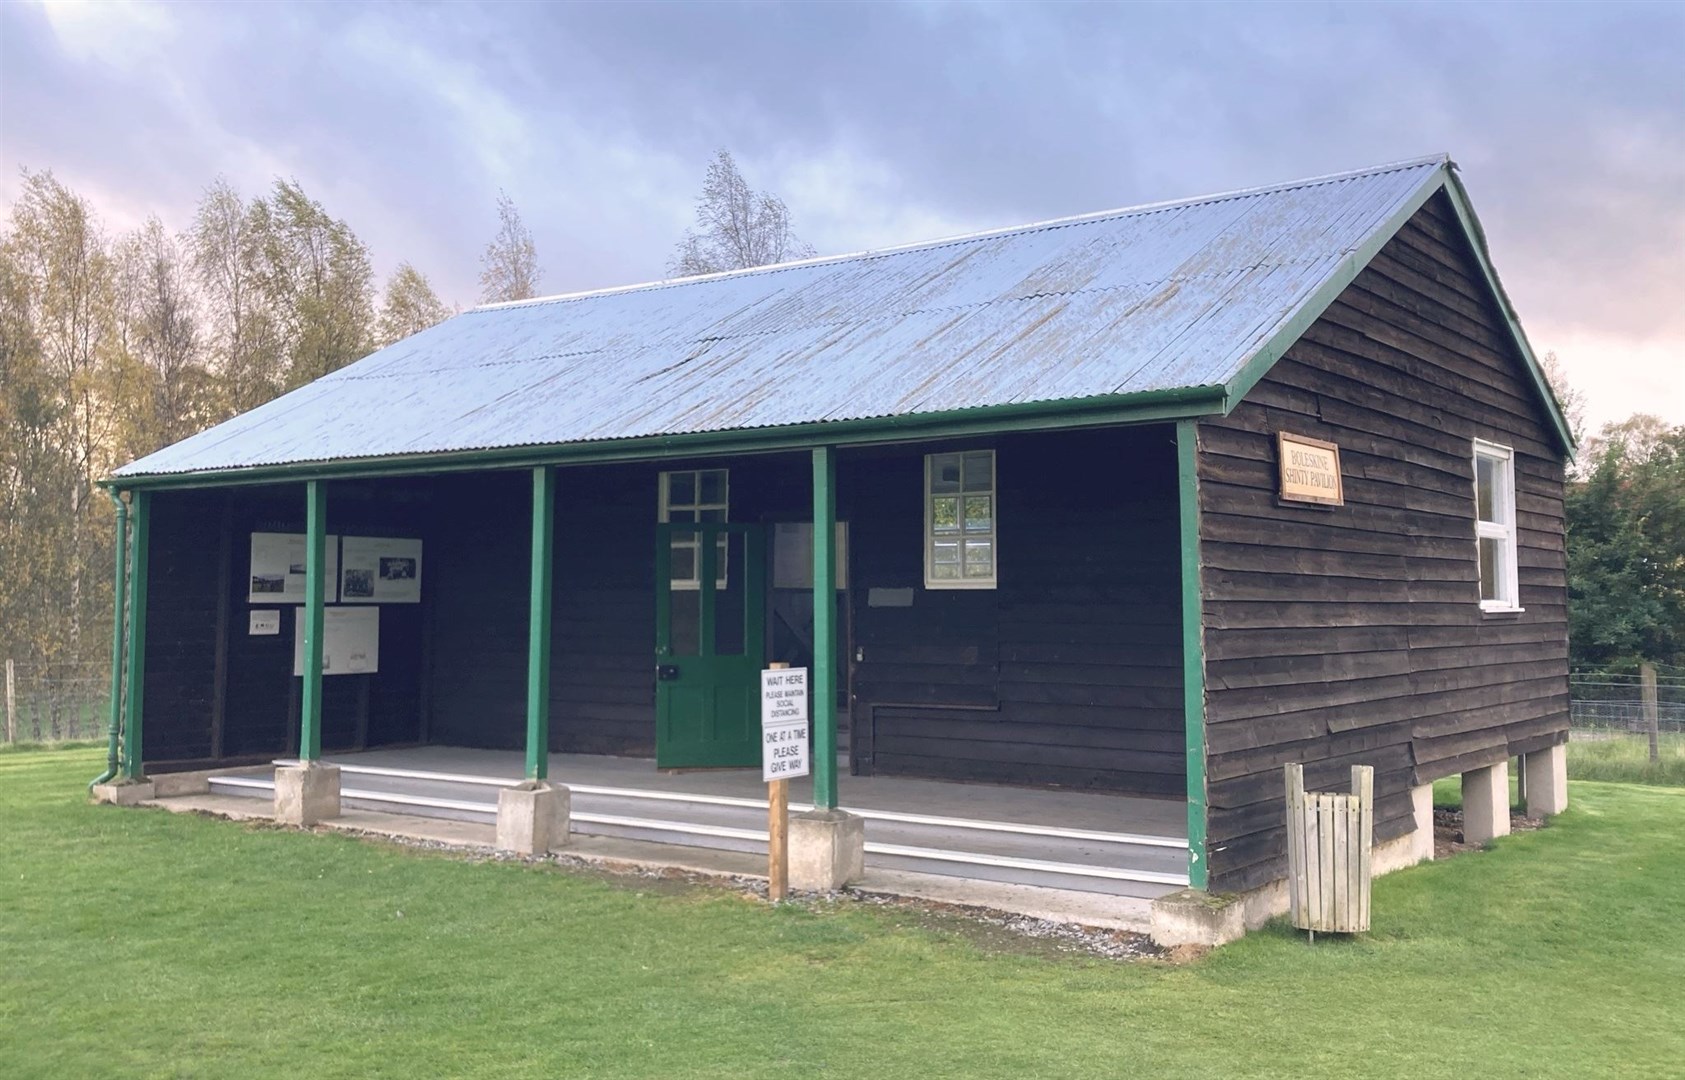 The outside of the Boleskin Shinty Pavilion which dates back to the 1930s.